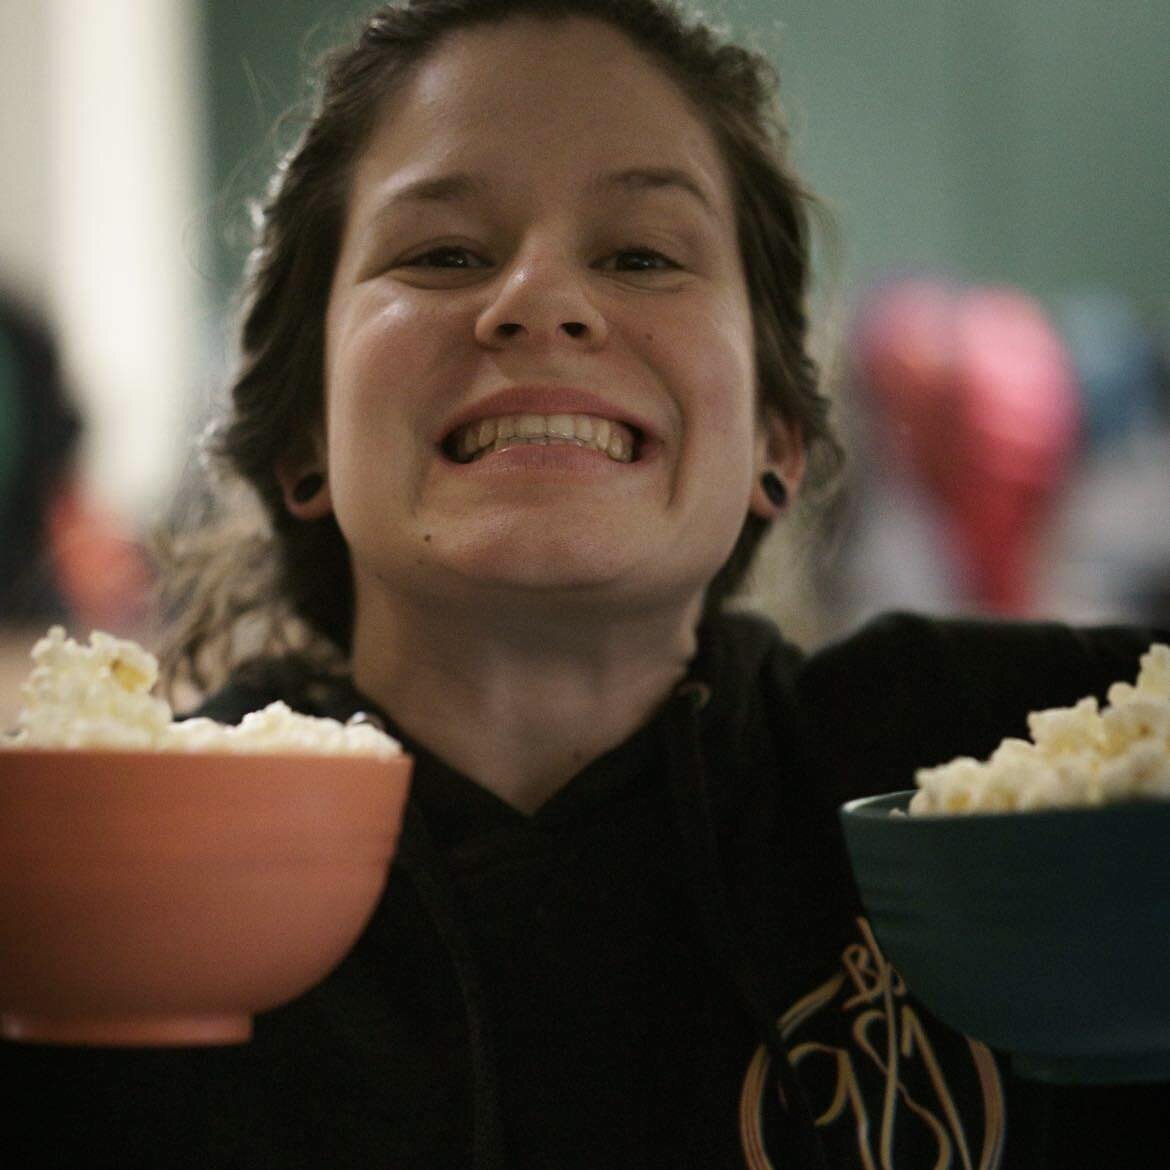 We'll serve you popcorn Saturday night! 🍿Cinema night on April 13 at 9pm. 
Organic ticket, bring your chair 🪑
-
We'll give you popcorn on Saturday night! 🍿Movie night on April 13 at 9 p.m.
Tickets in bio, bring your chair 🪑 
-
